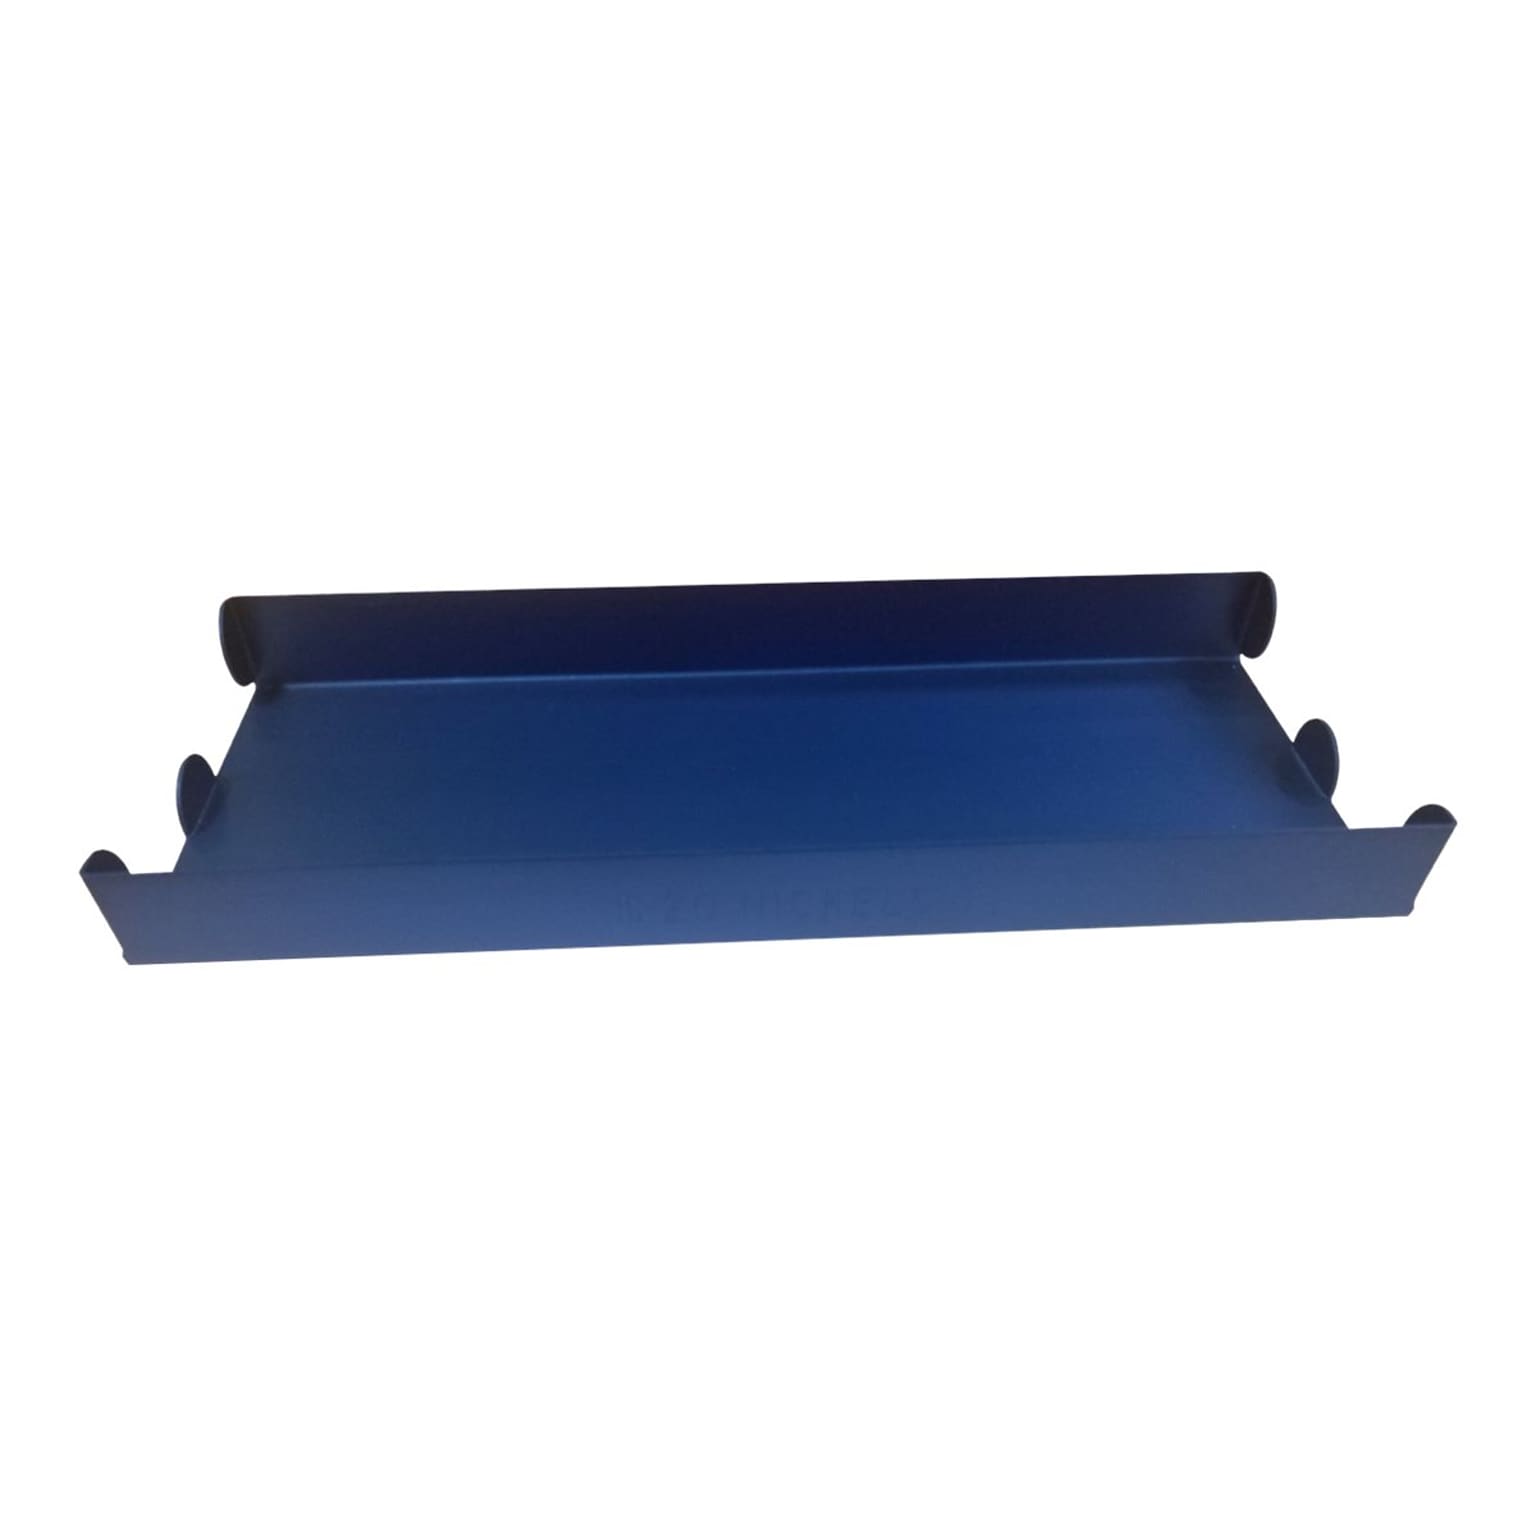 CONTROLTEK Coin Tray, 1 Compartment, Blue (560066)